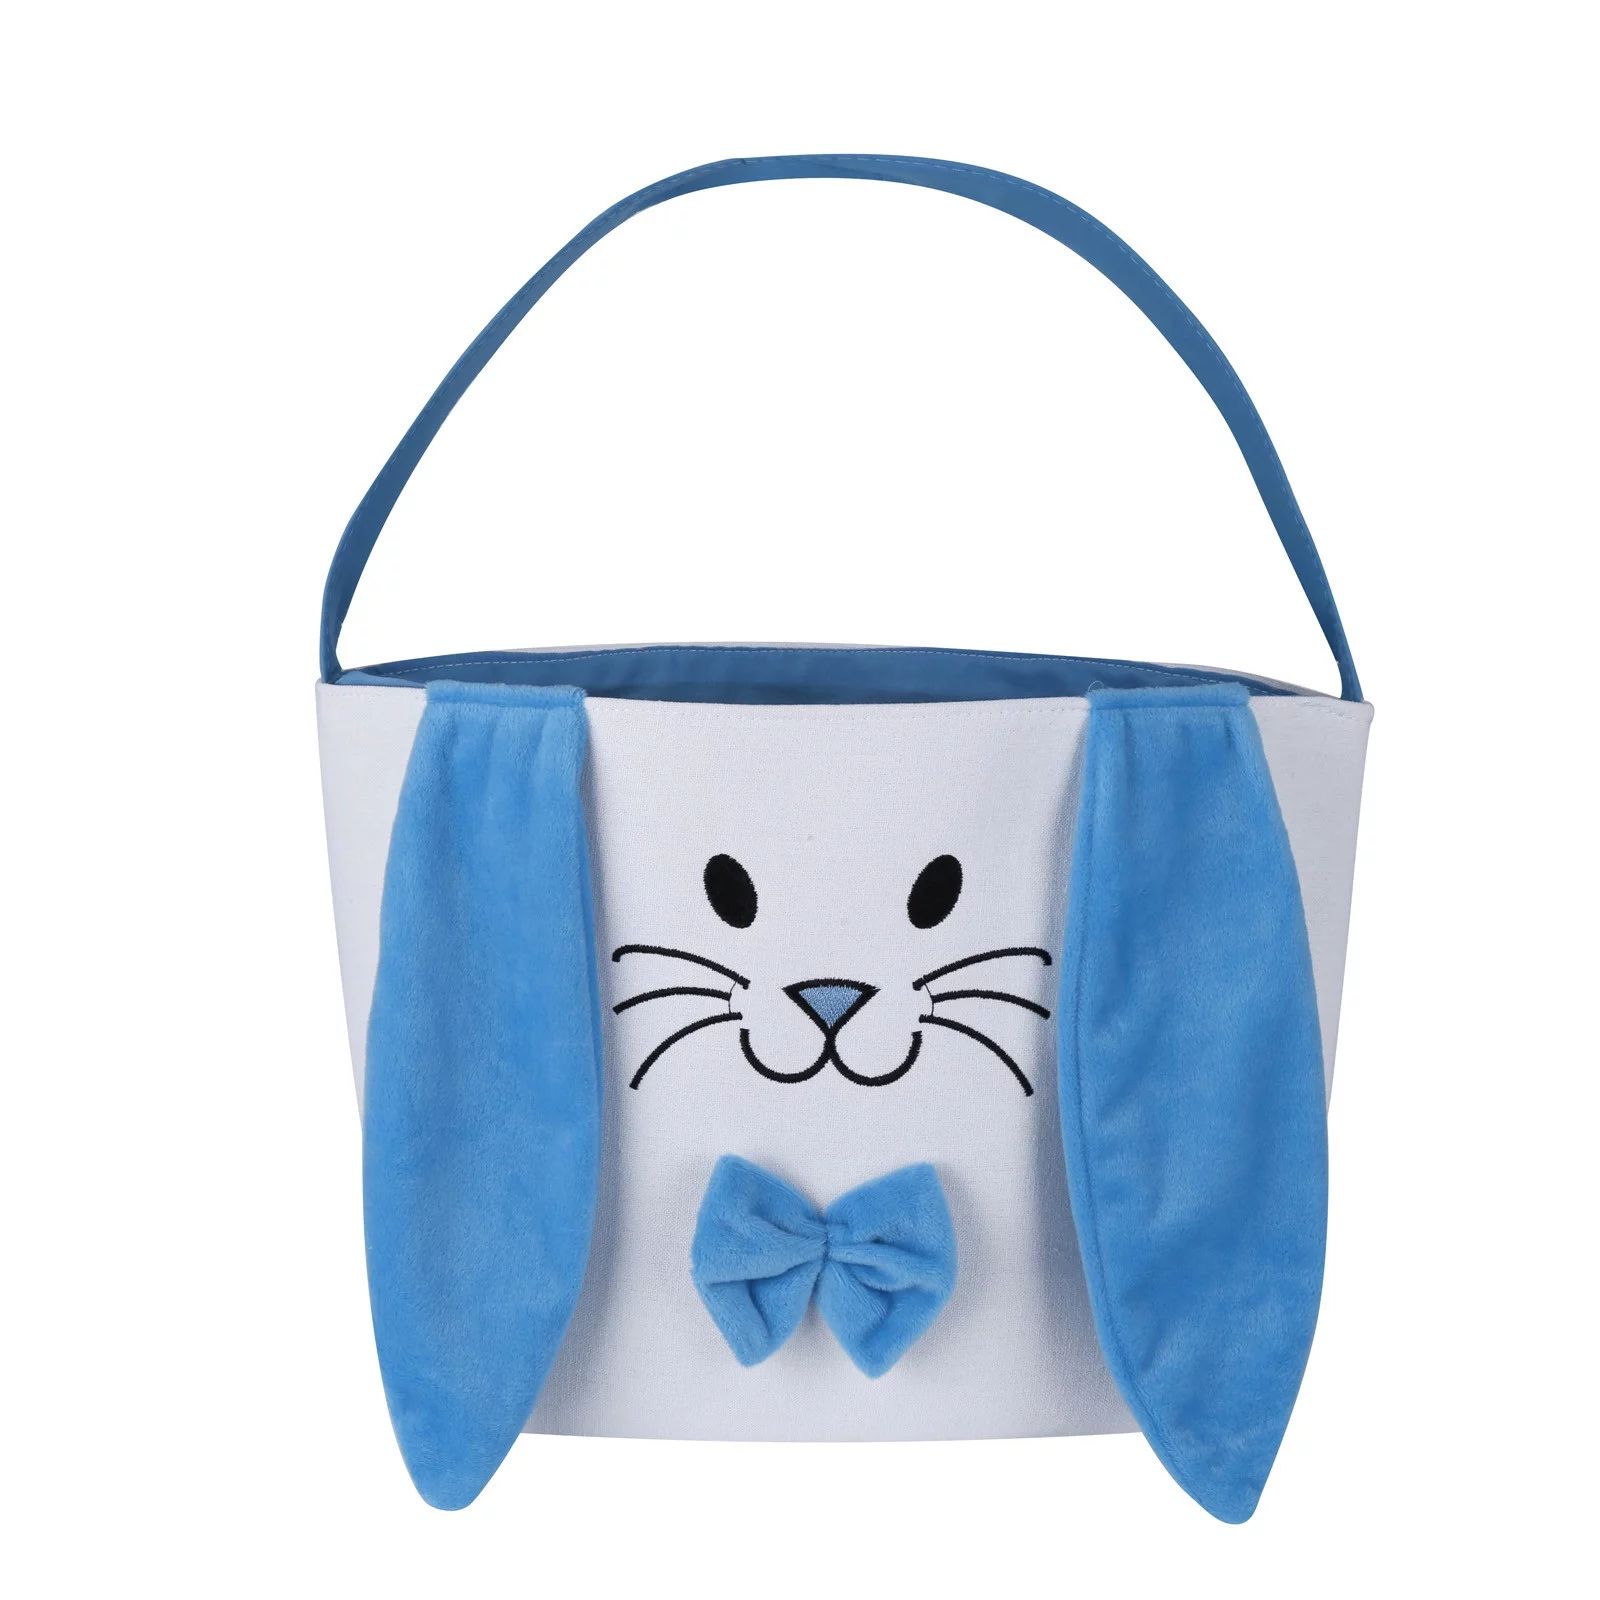 Hometimes Easter Bunny Basket for Kids,Cute Easter Bucket Bags with Rabbit Ears for Easter Eggs H... | Walmart (US)